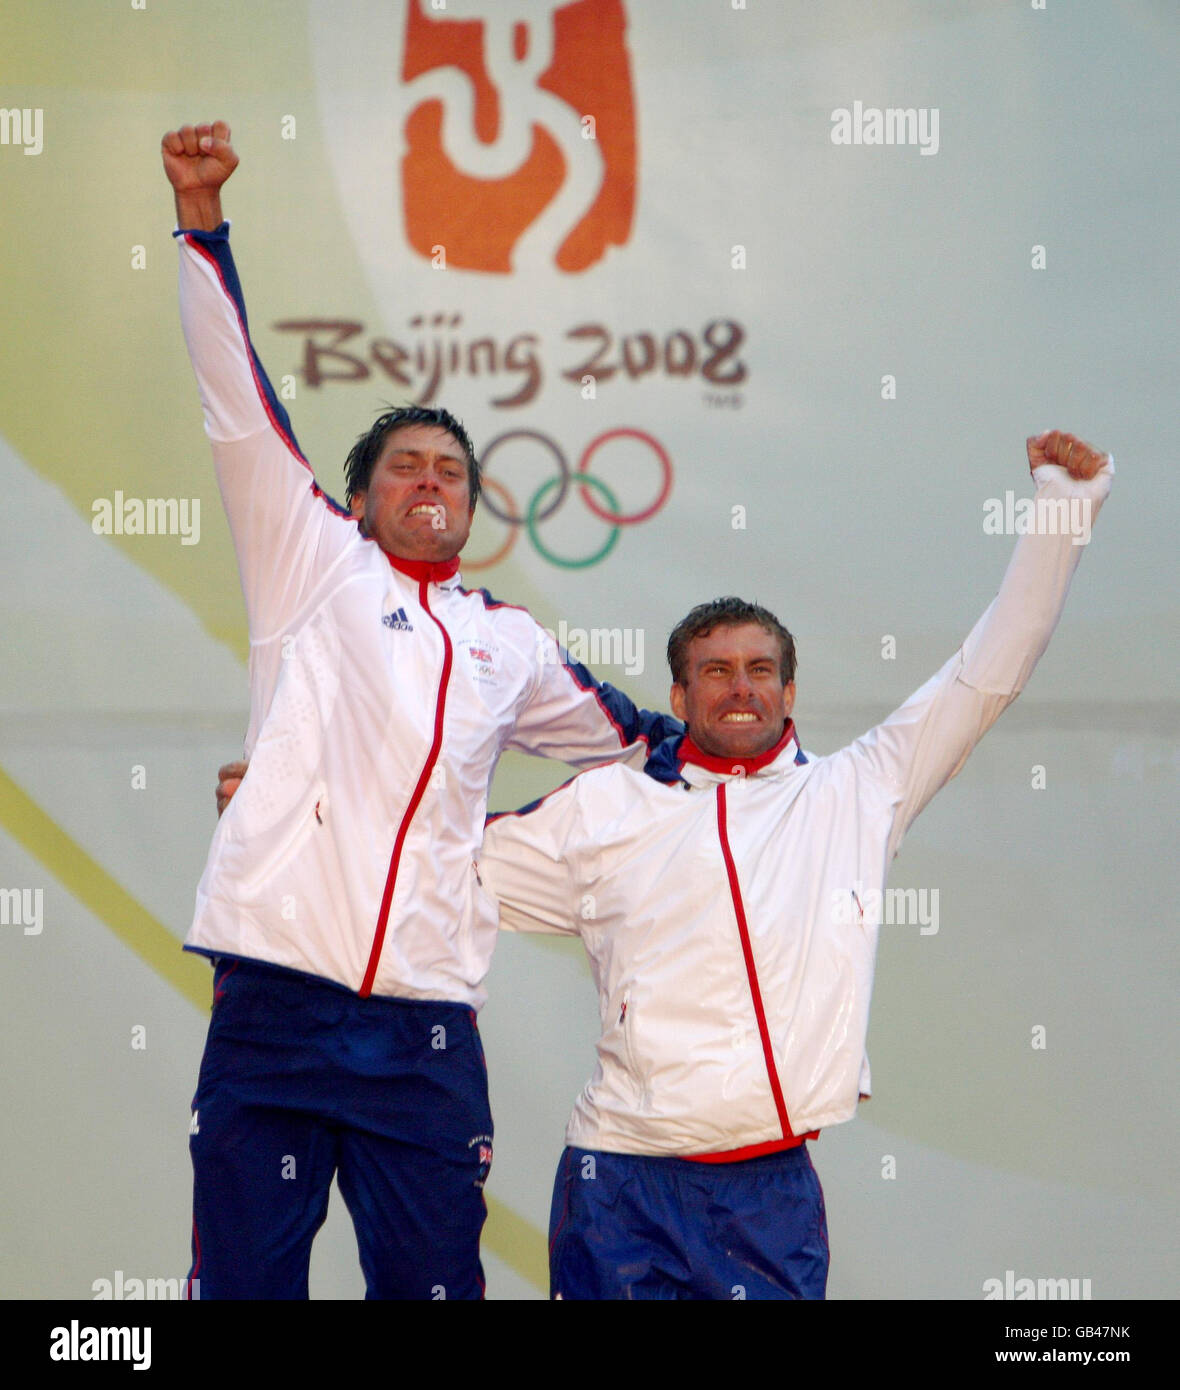 Great Britain's Star crew, Andrew Simpson (left) and Iain Percy, celebrate on the podium after winning their class at the 2008 Beijing Olympic Games' Sailing Centre in Qingdao, China. Stock Photo